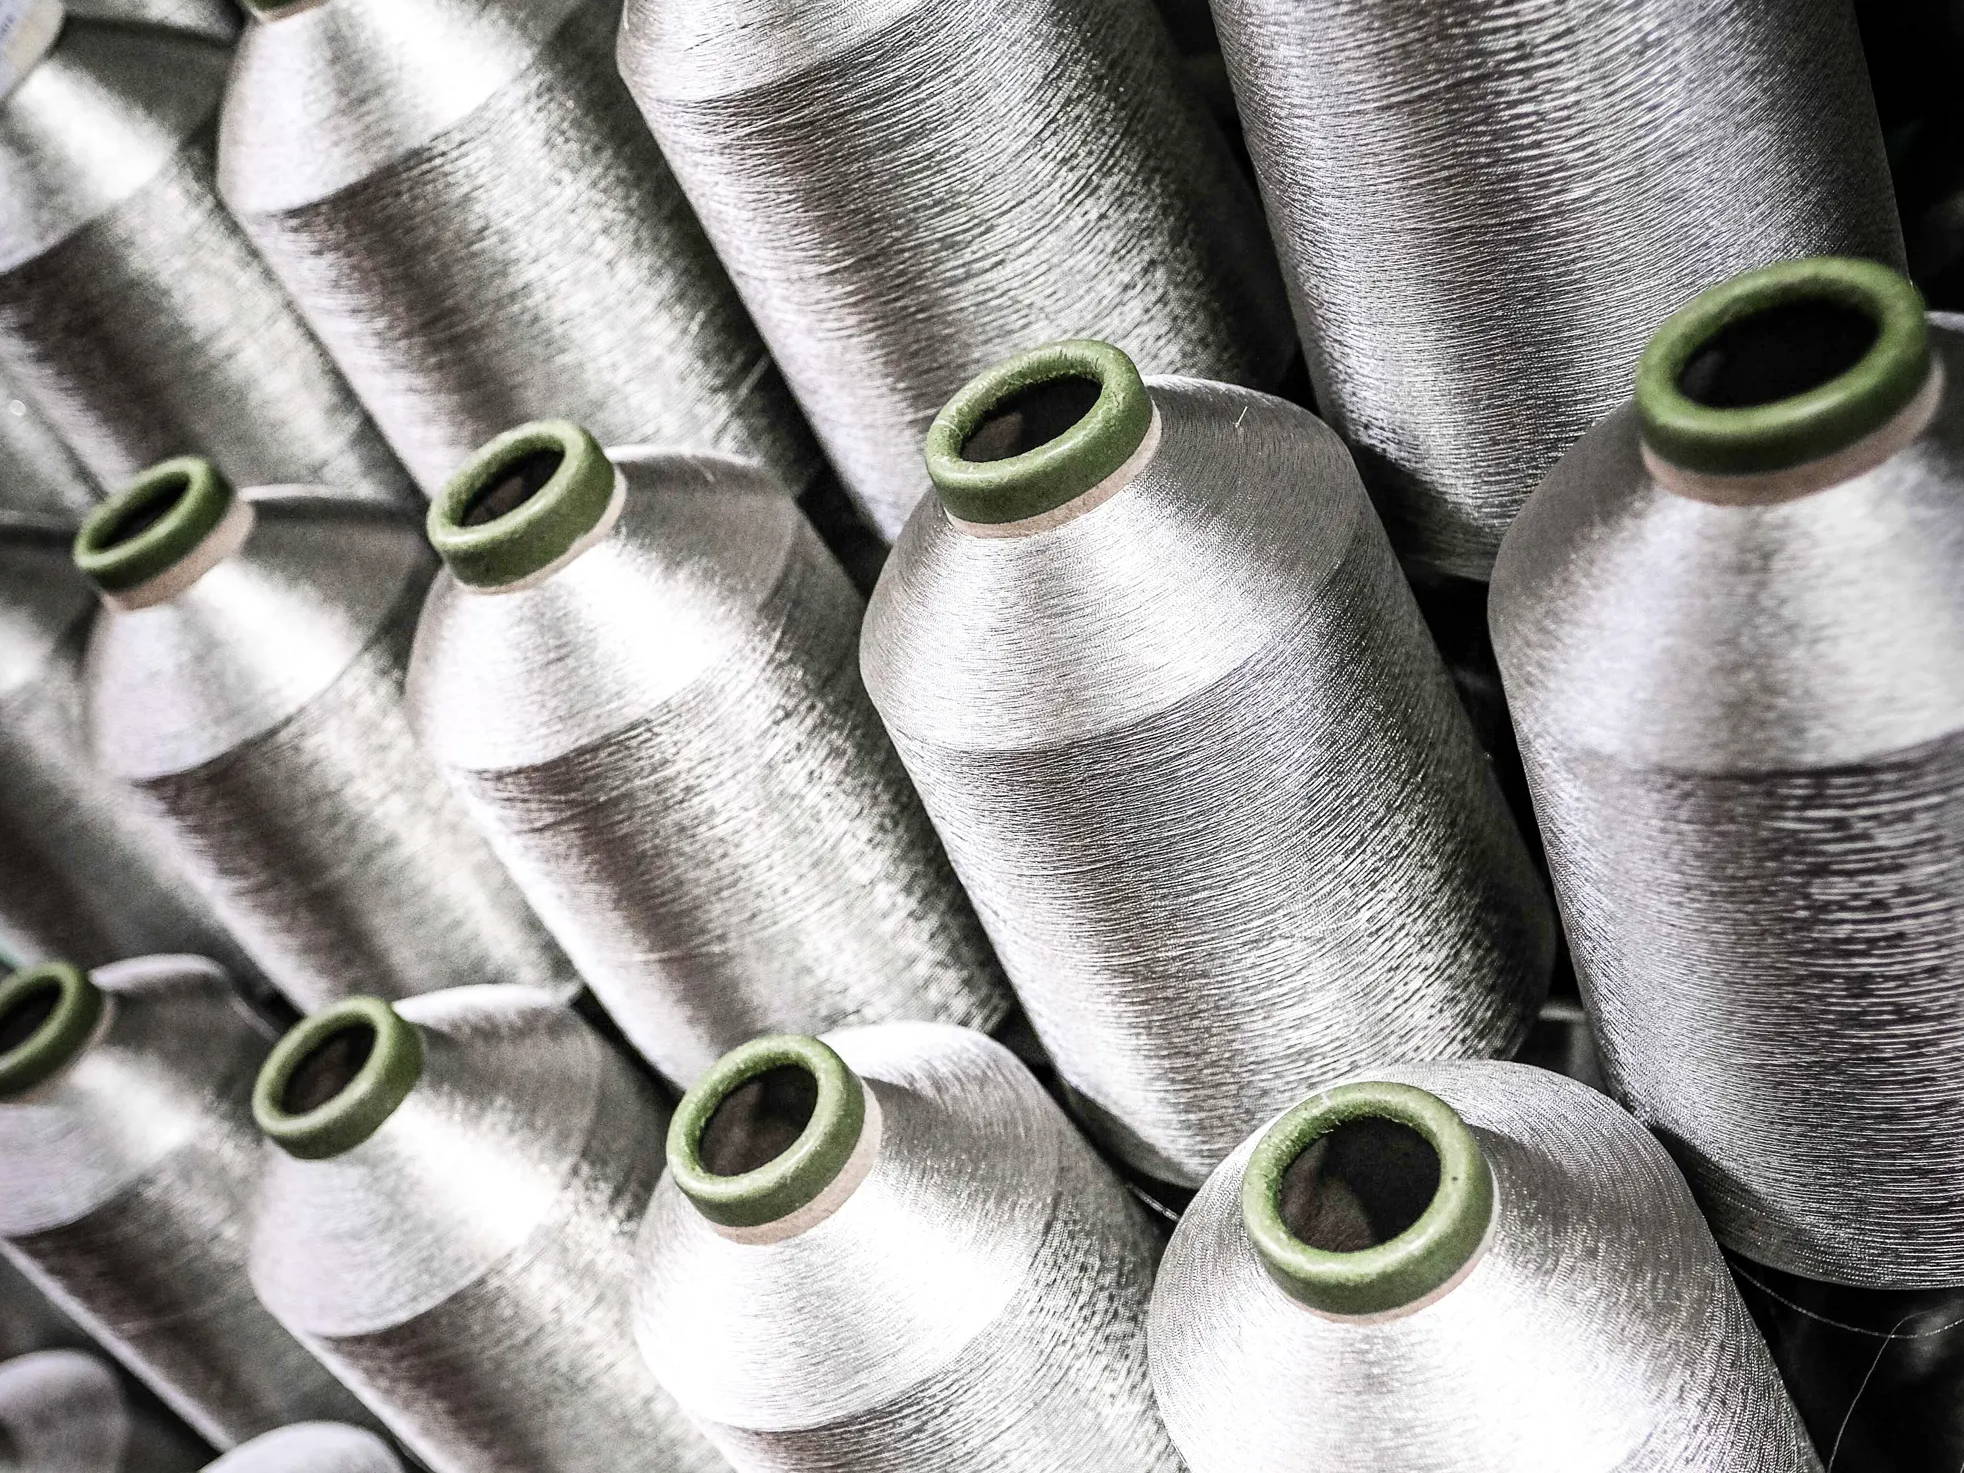 A picture of rolls of silver thread